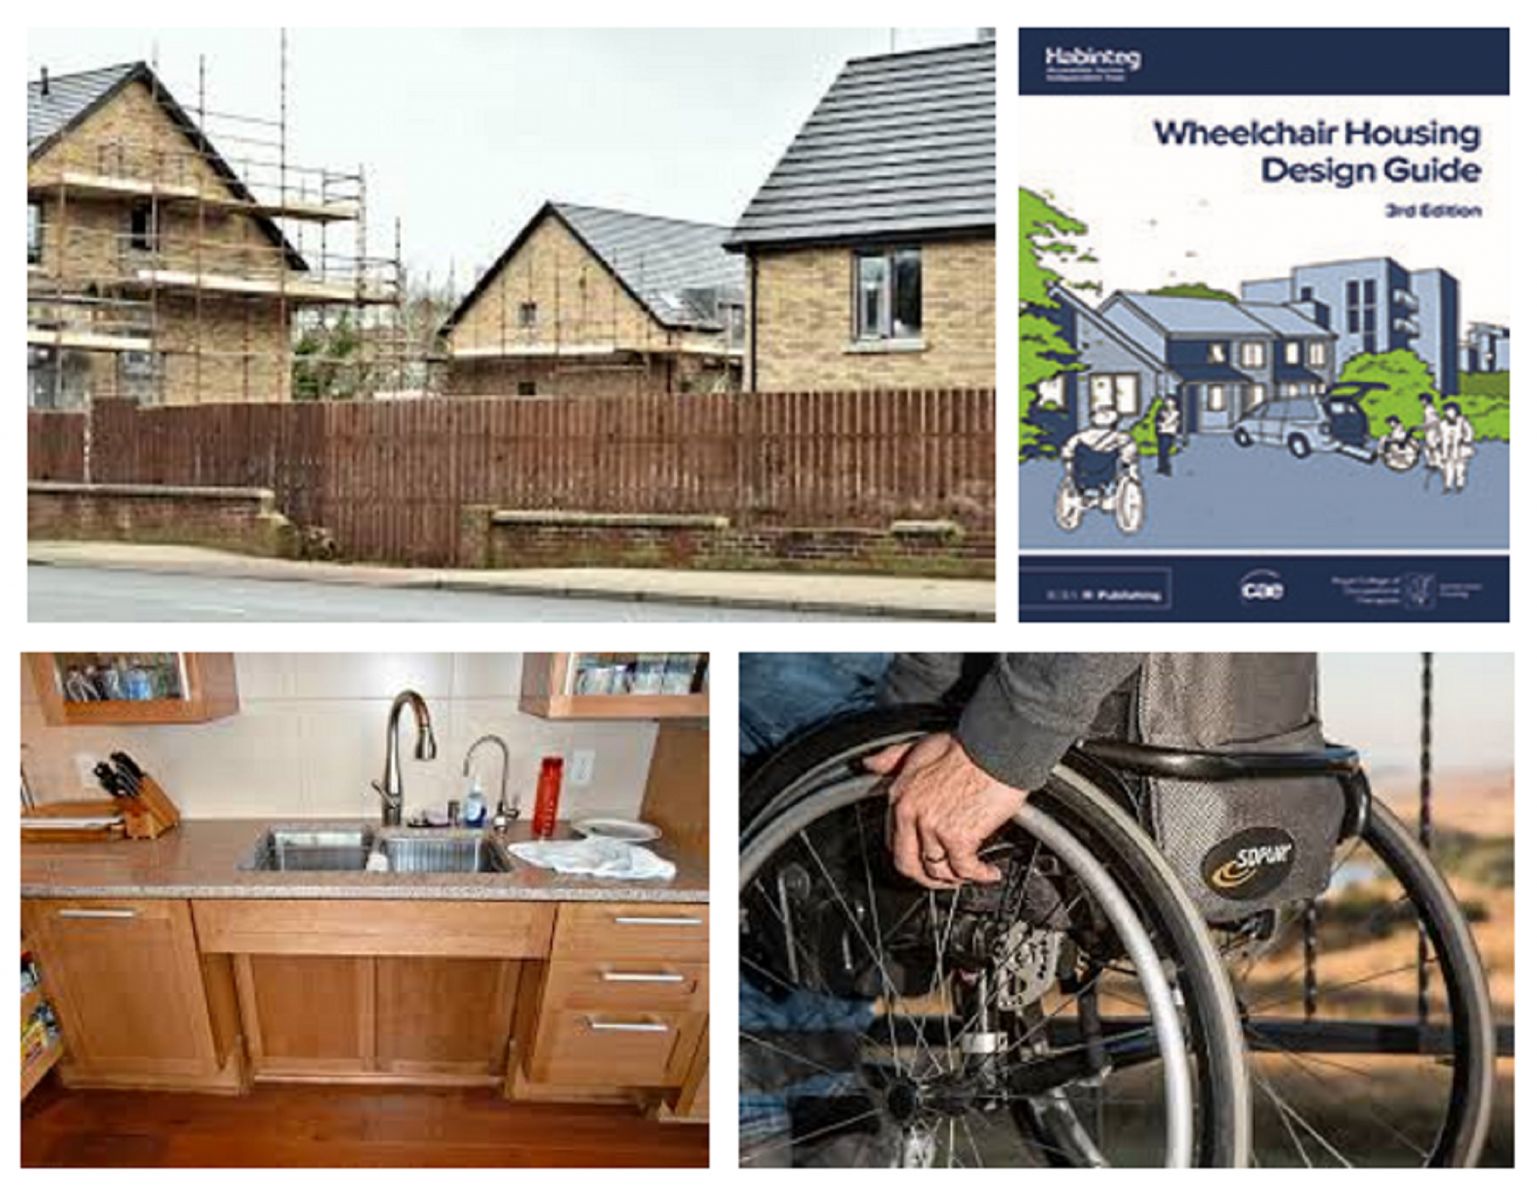 Houses under construction, wheelchair accessible kitchen and cover of 'Wheelchair Housing Design Guide'.